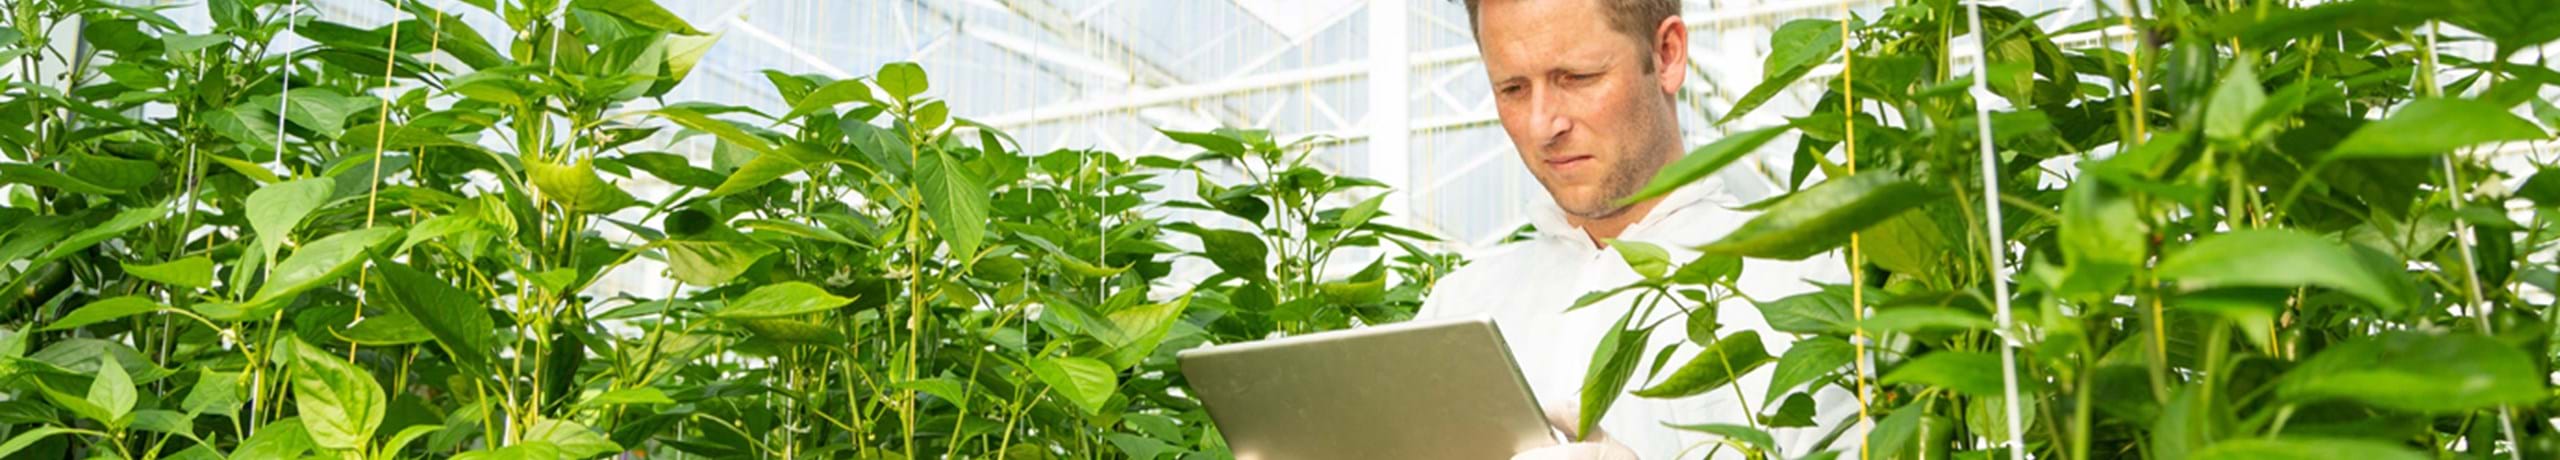 greenhouse innovative management system for cultivation in high tech greenhouse